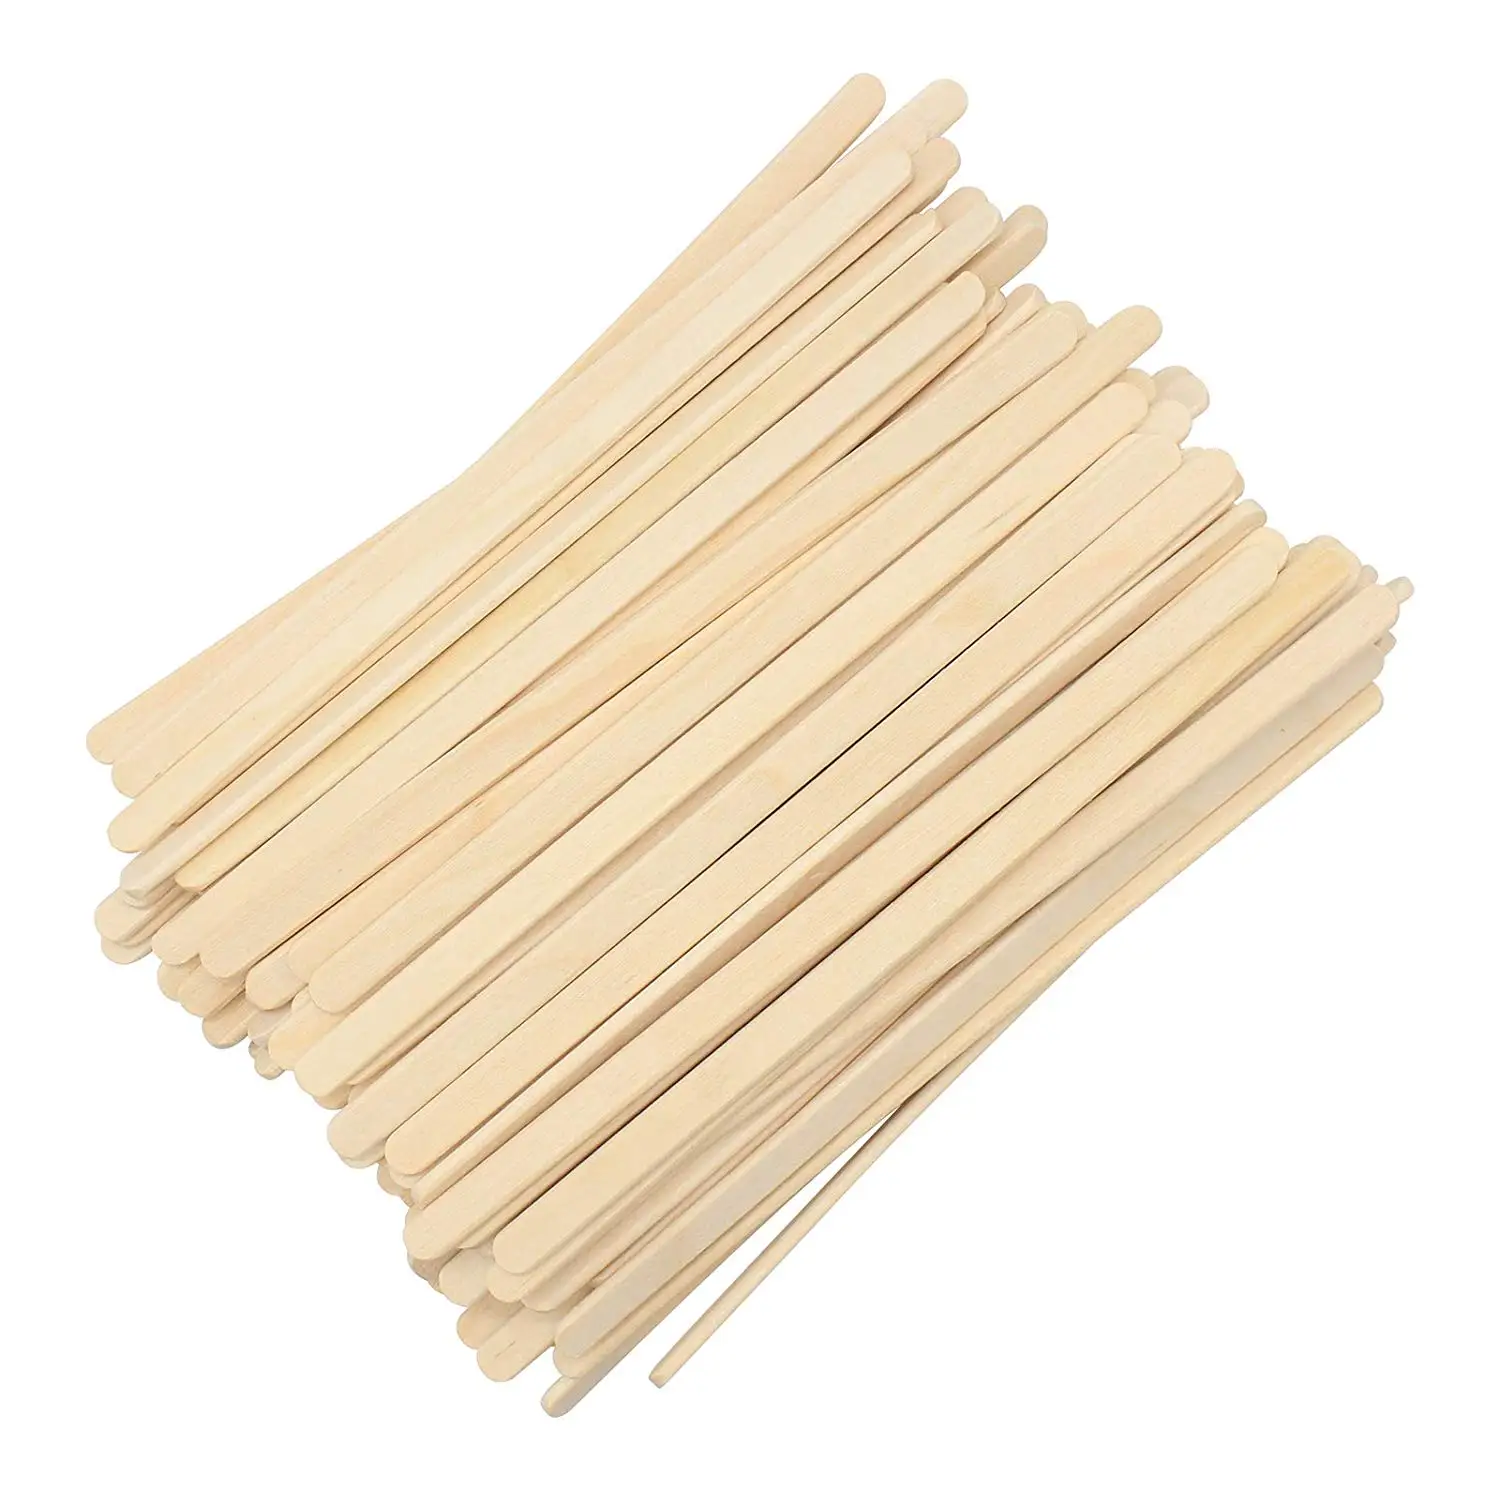 Disposable Paper Wrapped Wooden Coffee Stir Sticks Wood Tea Beverage Stirrers 7.5 Inch 500 Pcs